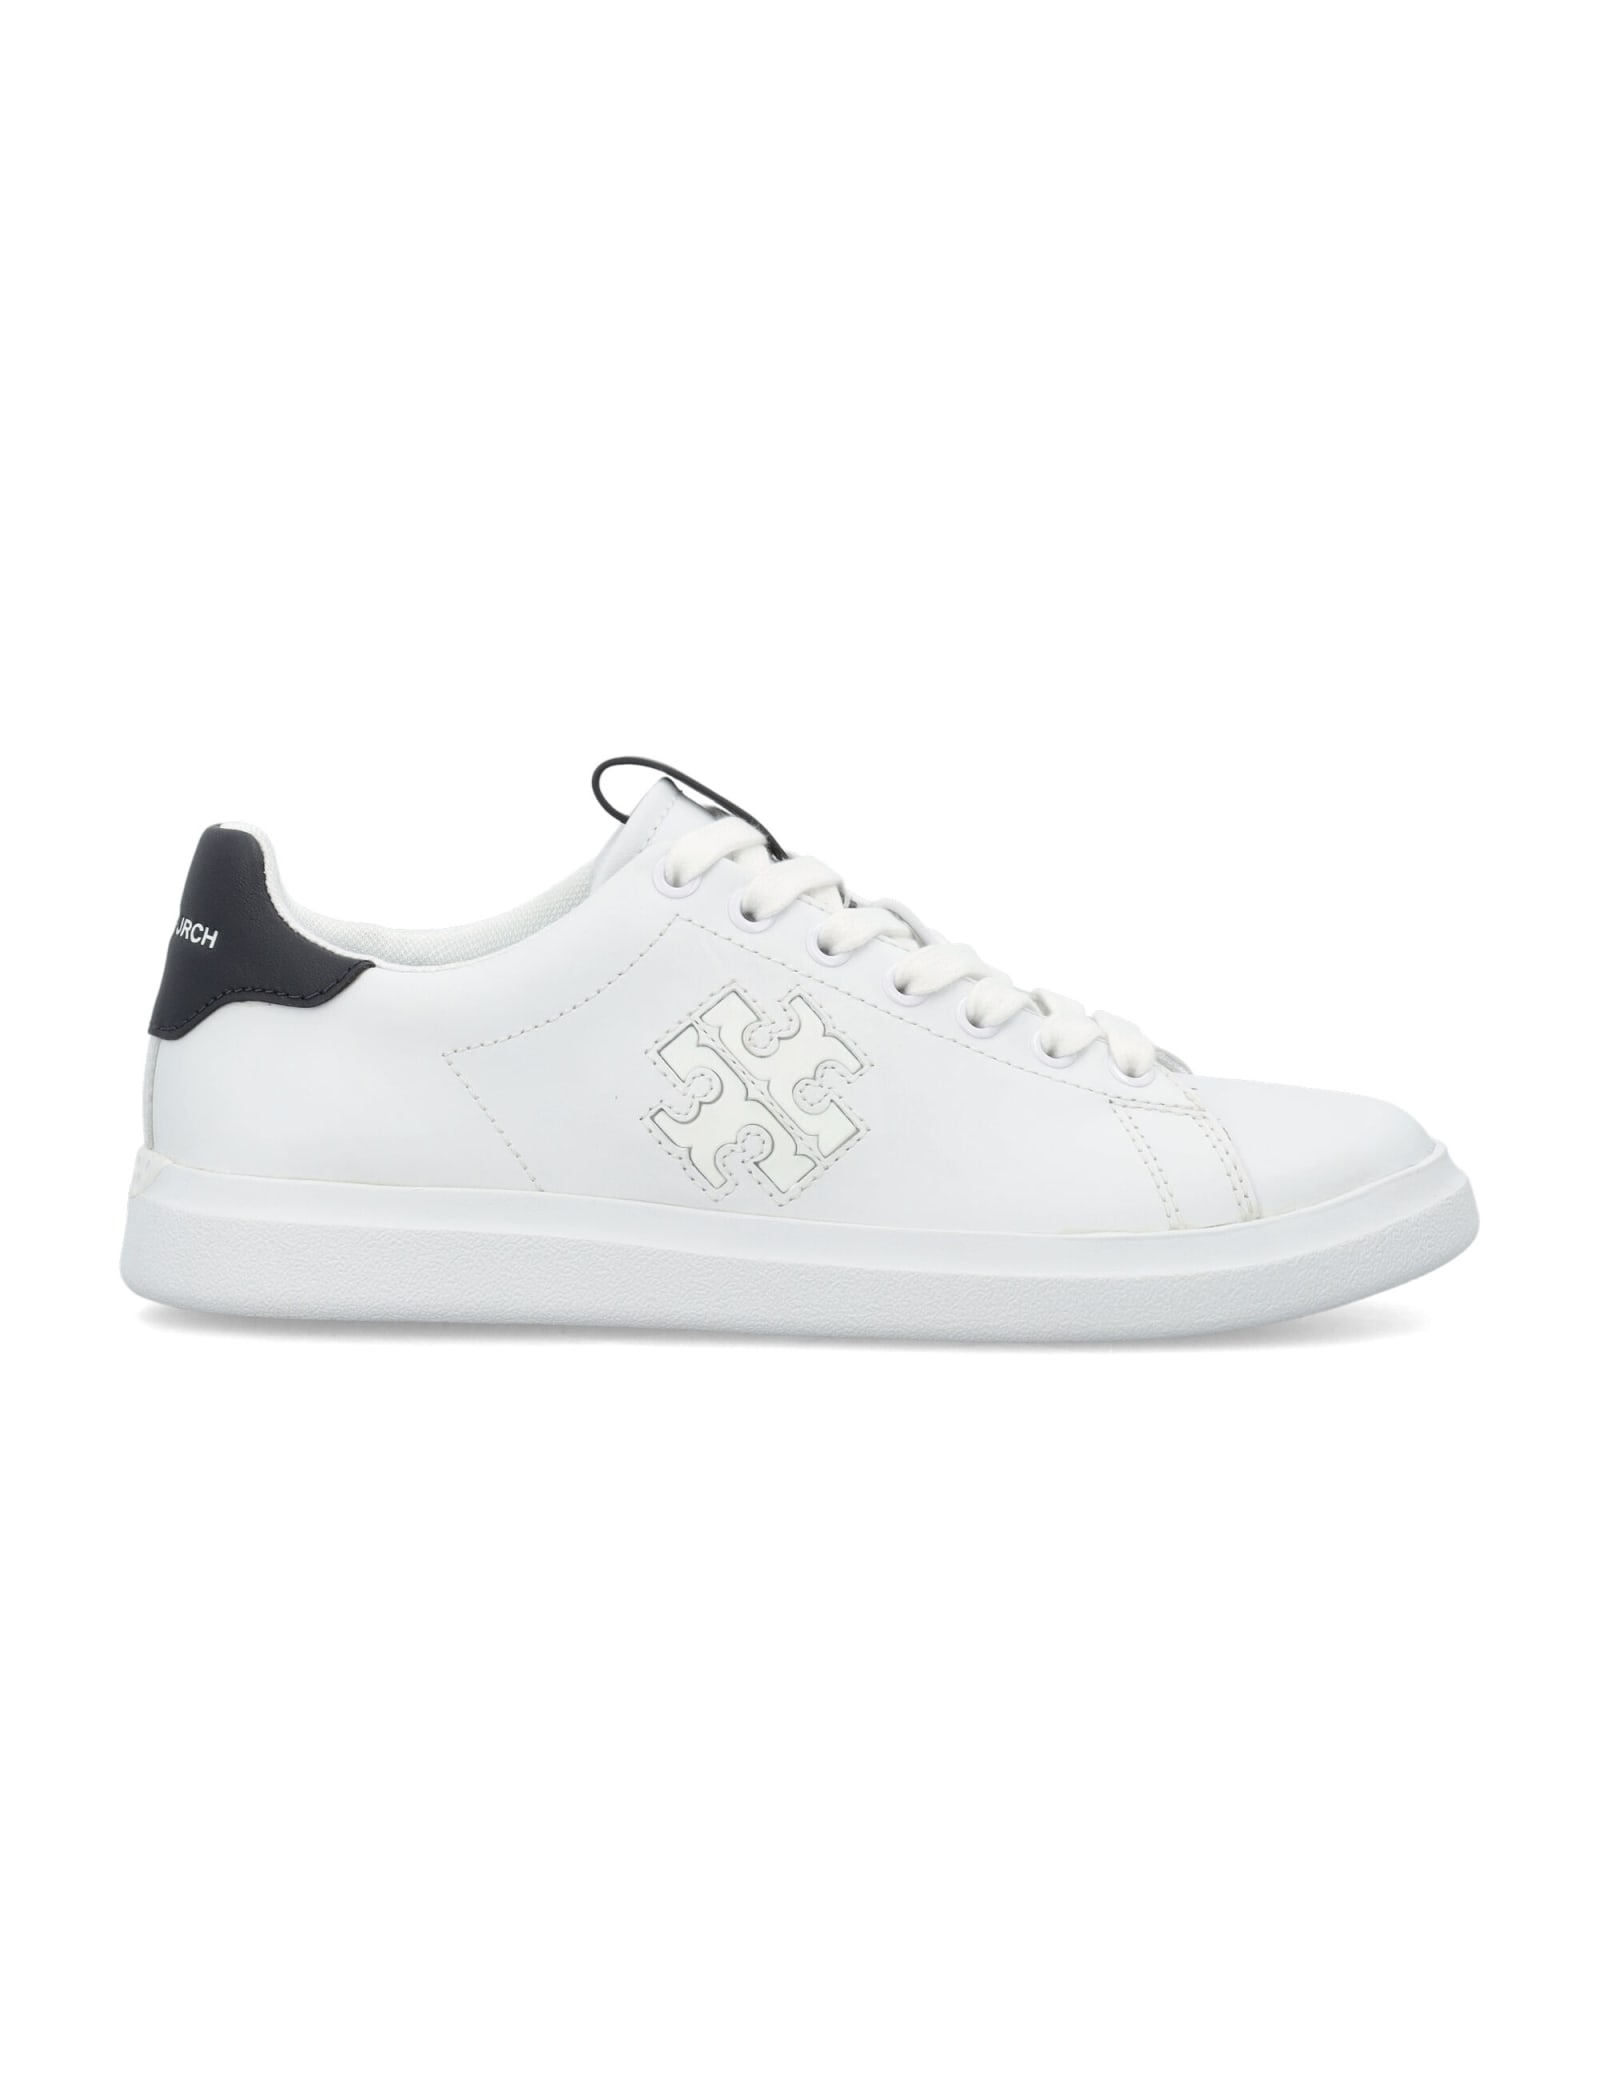 TORY BURCH DOUBLE T HOWELL COURT SNEAKERS